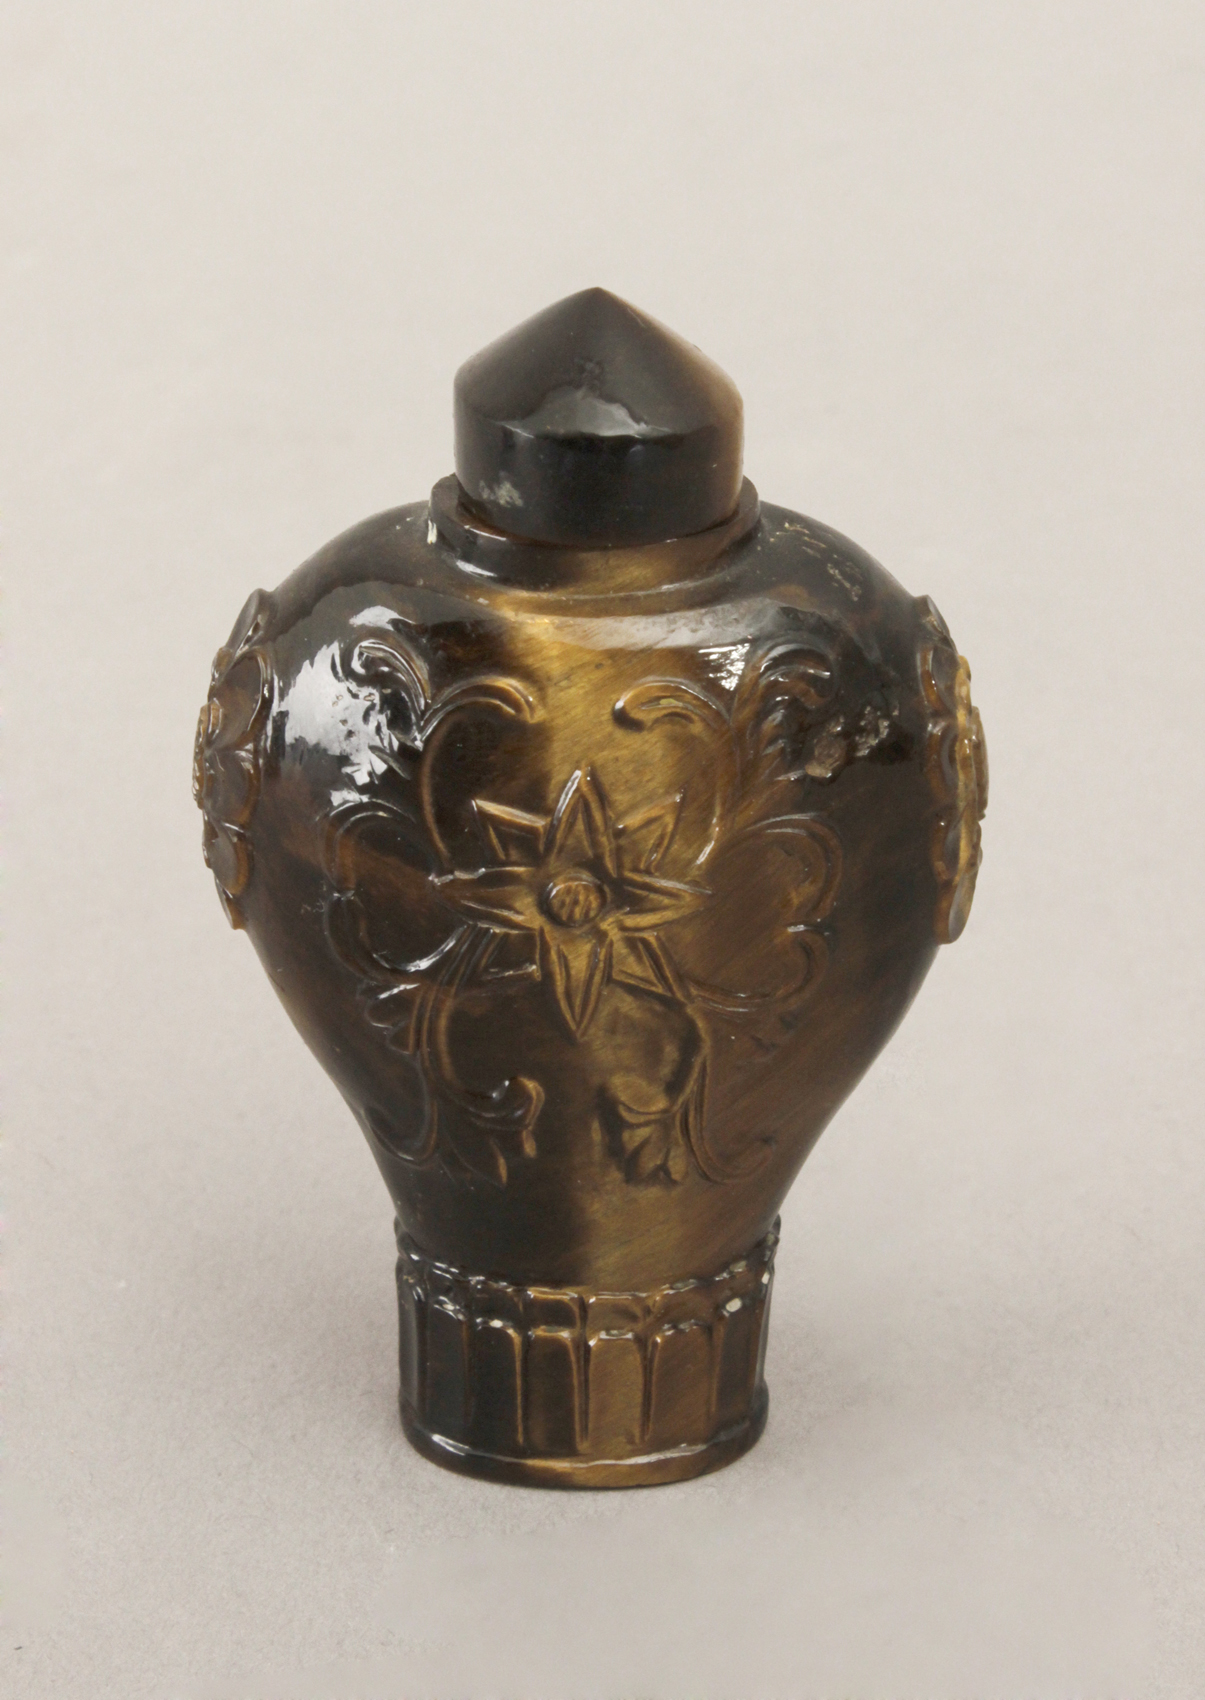 A 20th century Chinese carved tiger's eye quartz snuff bottle - Image 2 of 2